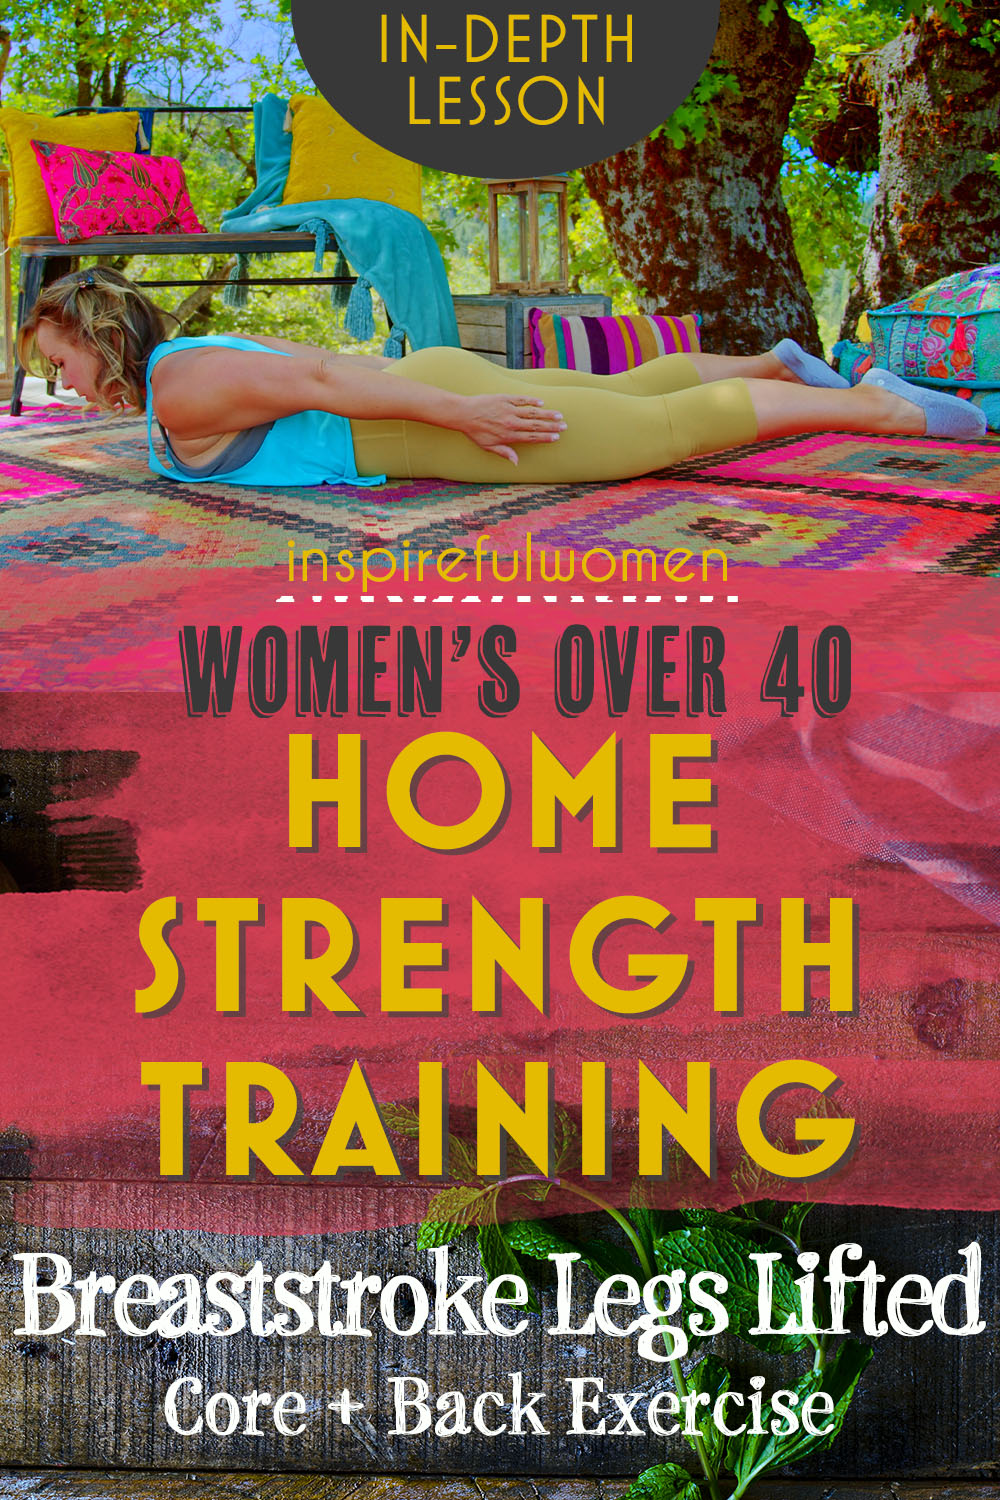 breaststroke-legs-lifted-laying-down-pilates-swimming-ab-back-exercise-women-40+